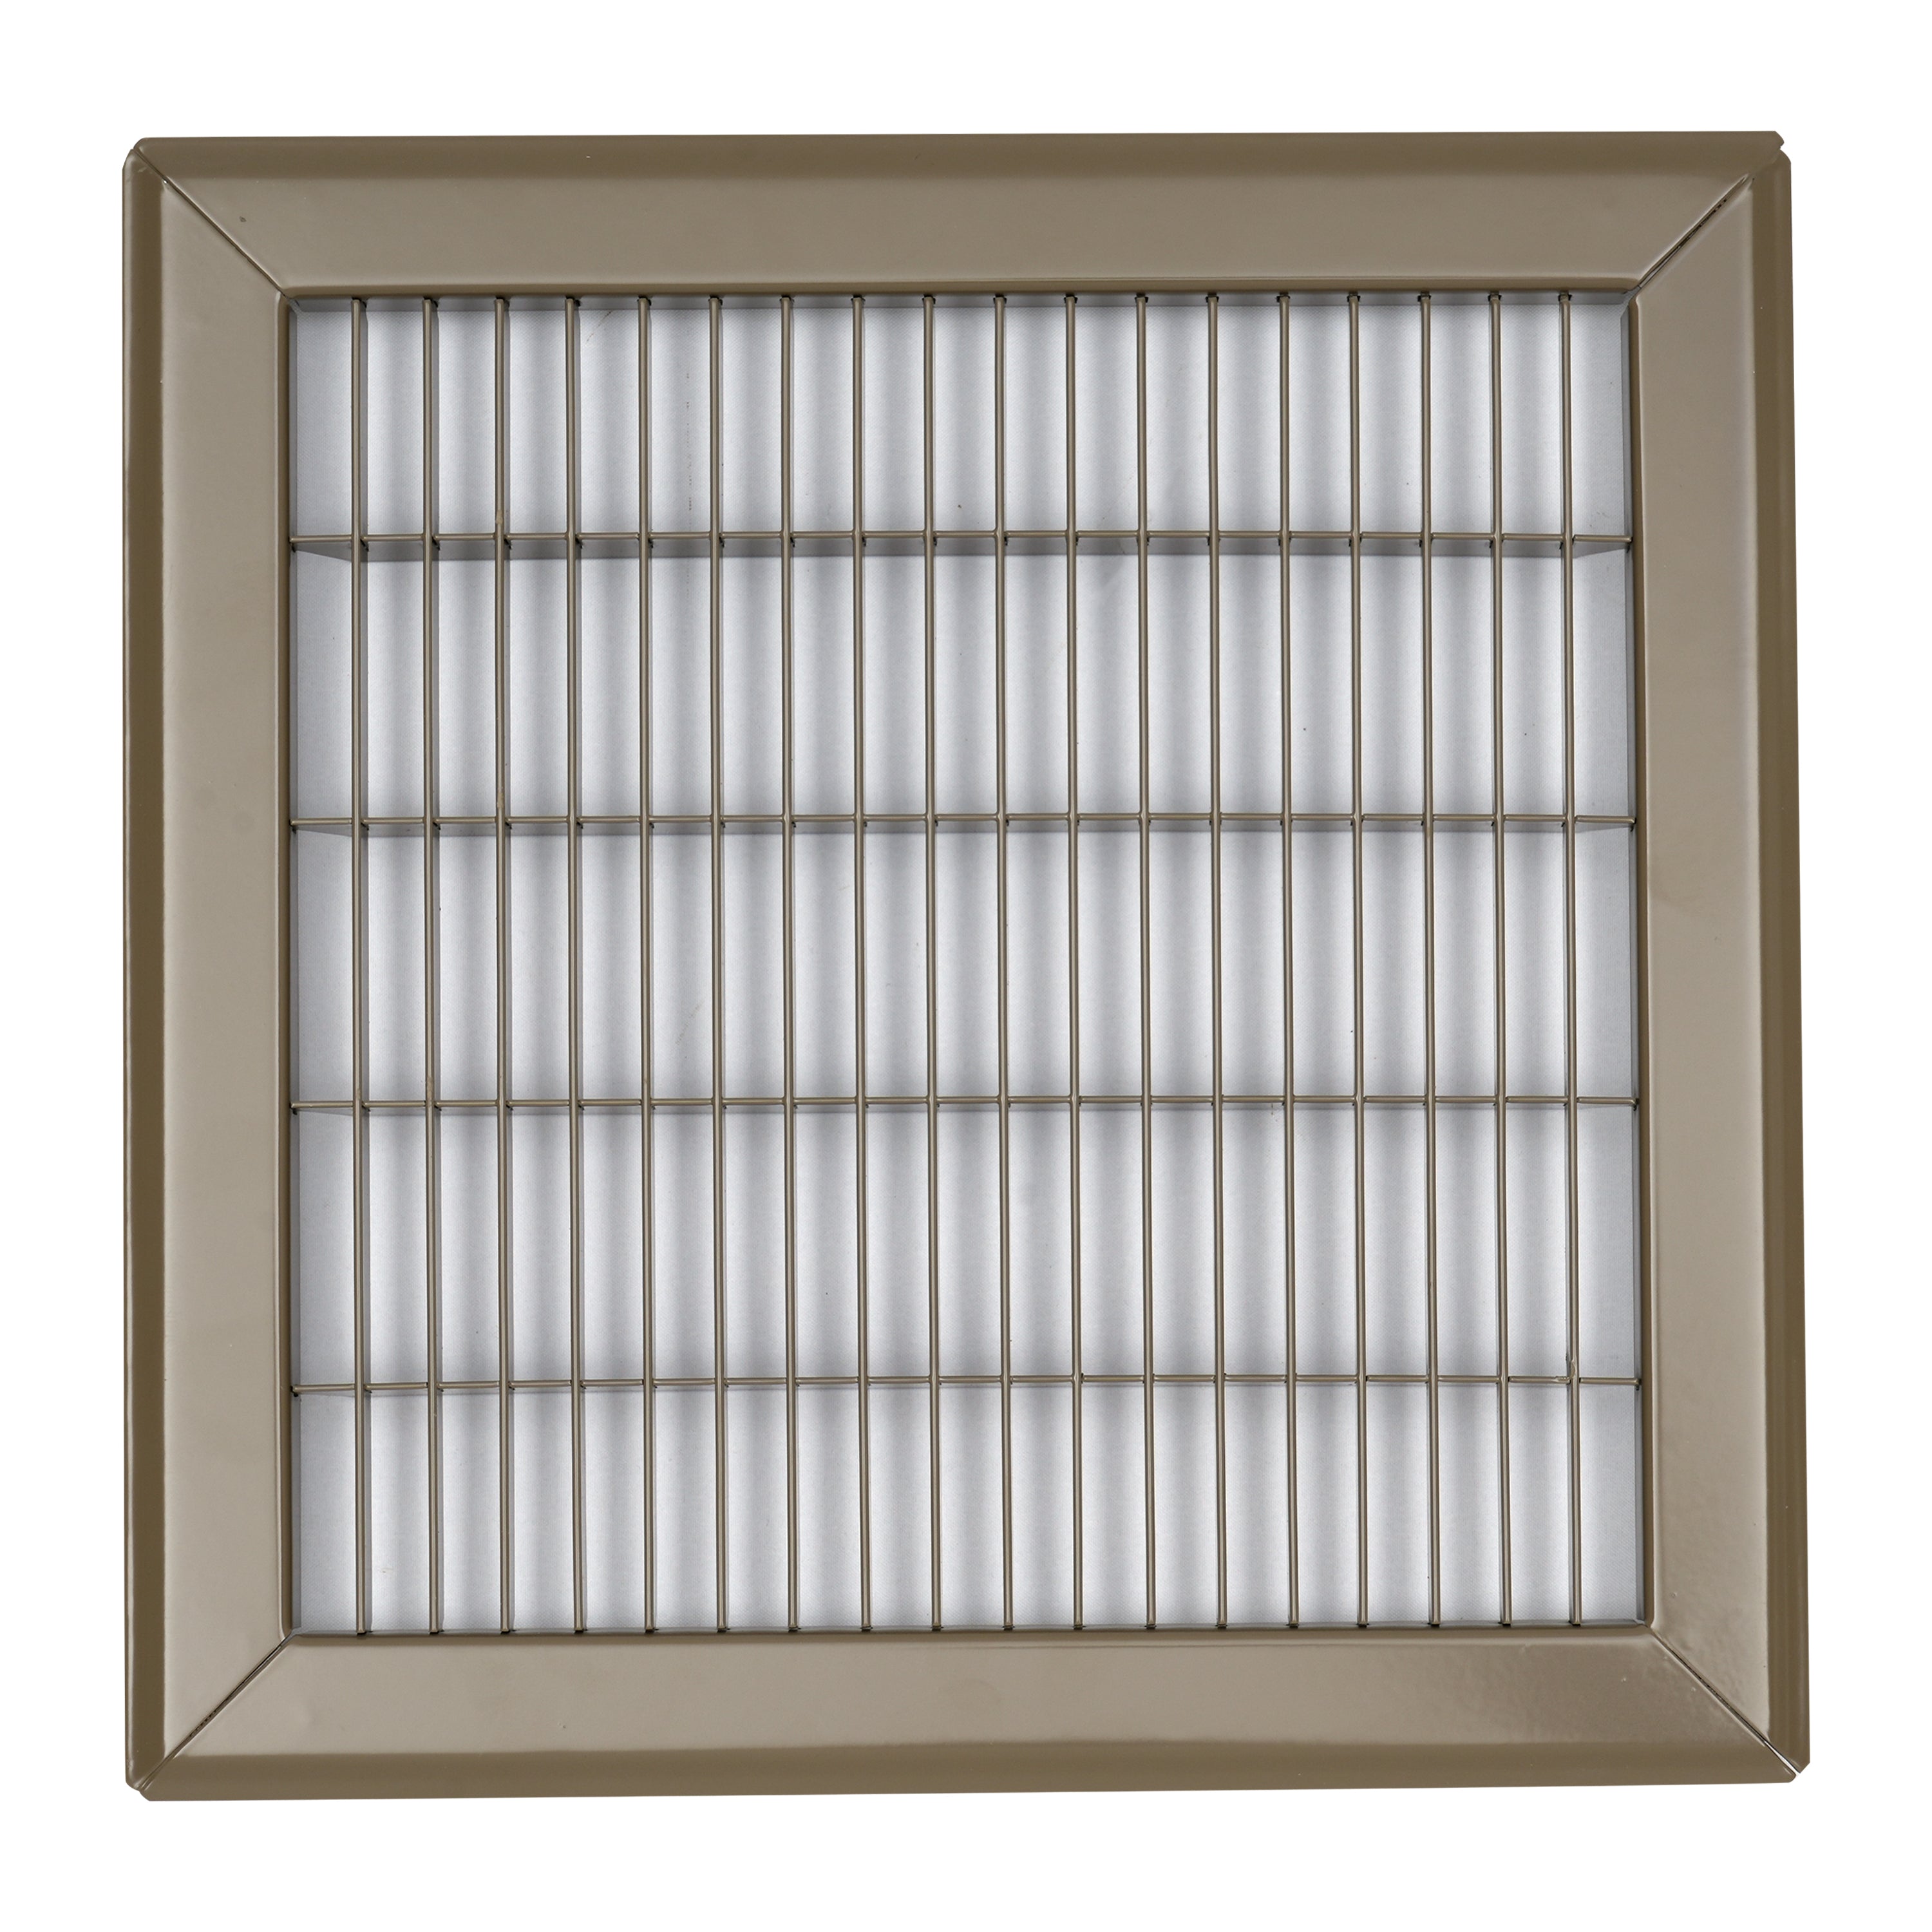 10"W x 10"H [Duct Opening] Return Air Floor Grille | Vent Cover Grill for Floor - Brown| Outer Dimensions: 11.75"W X 11.75"H